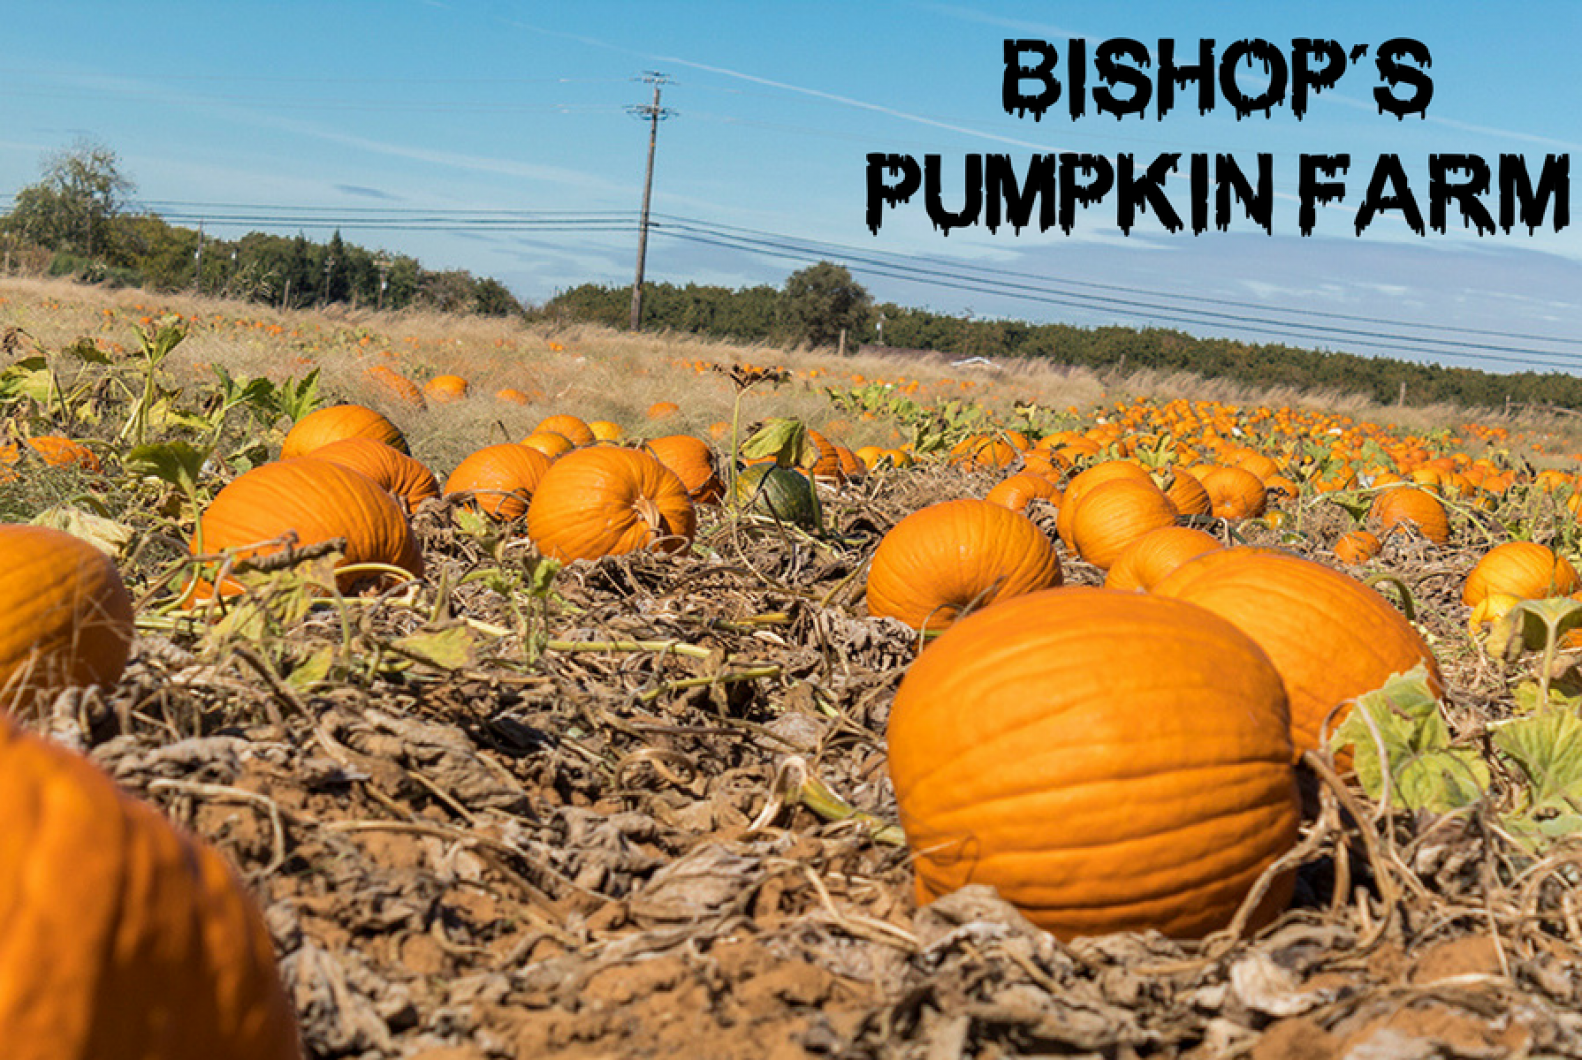 Bishop’s Pumpkin Farm is one of few places in the area where you can go and pick your own pumpkins off the vine. Some of these pumpkins can grow up to 200 pounds. (Matthew Nobert – The State Hornet)